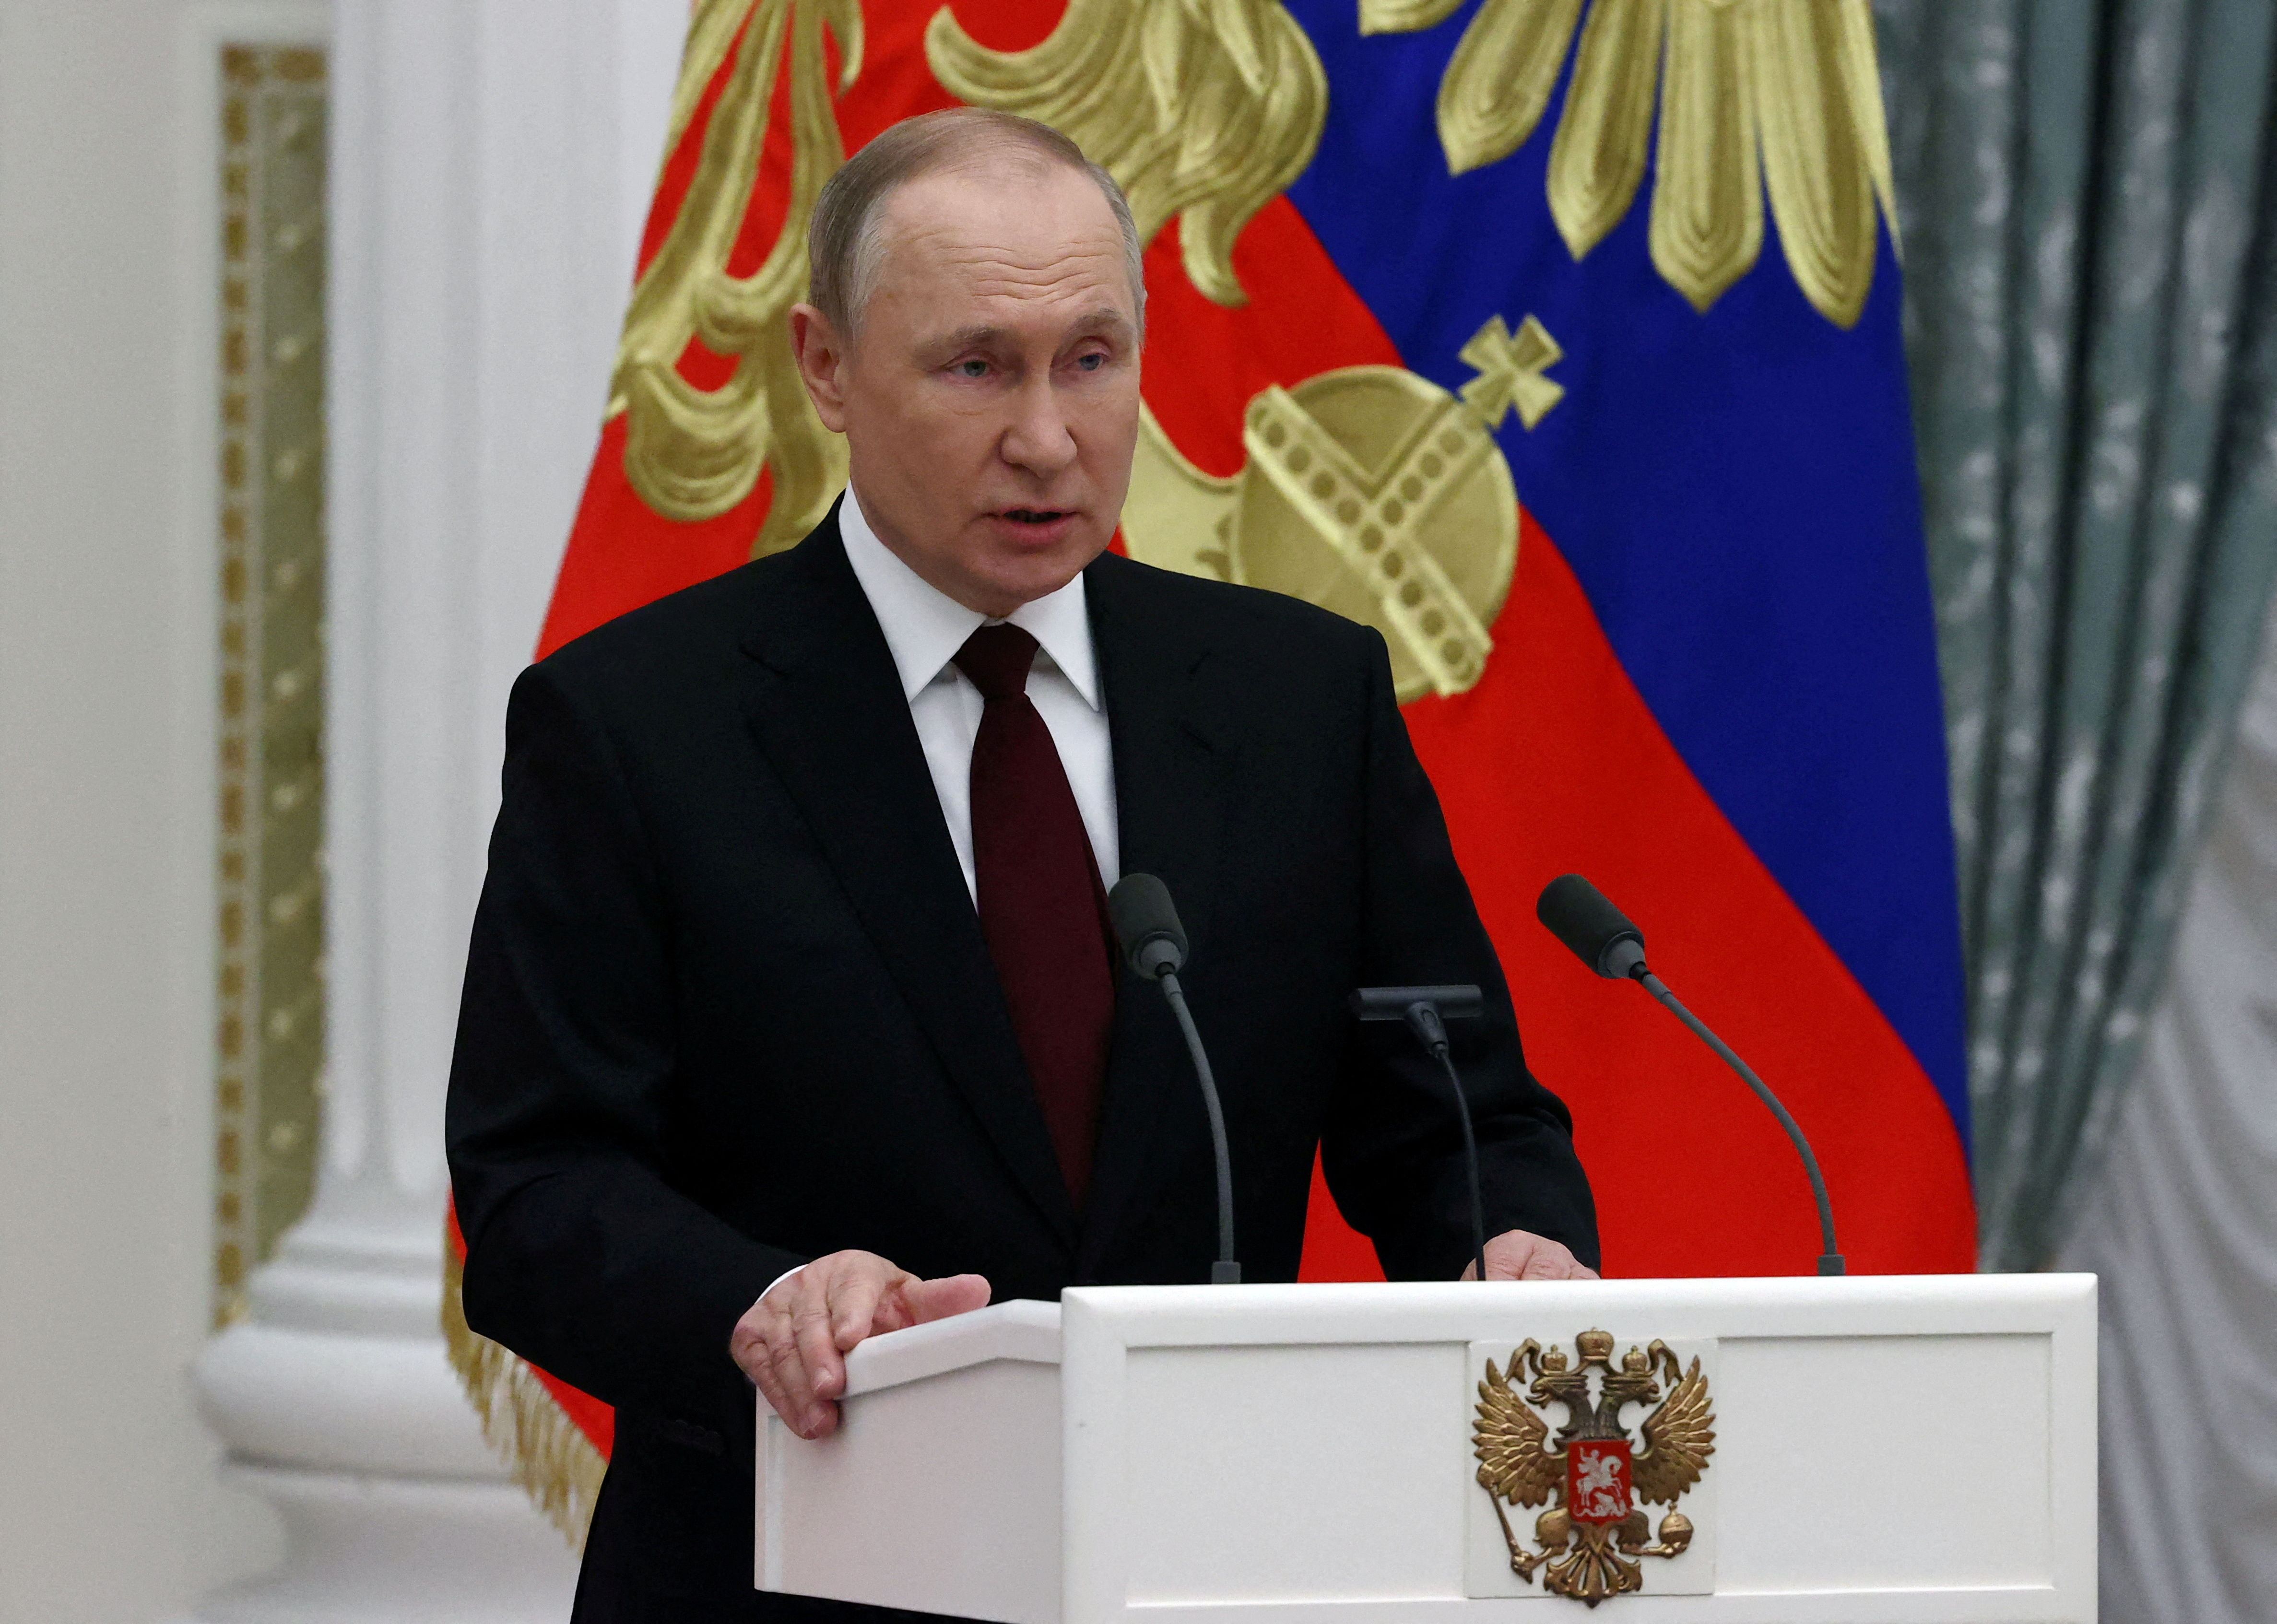 Russian President Putin attends an awarding ceremony in Moscow